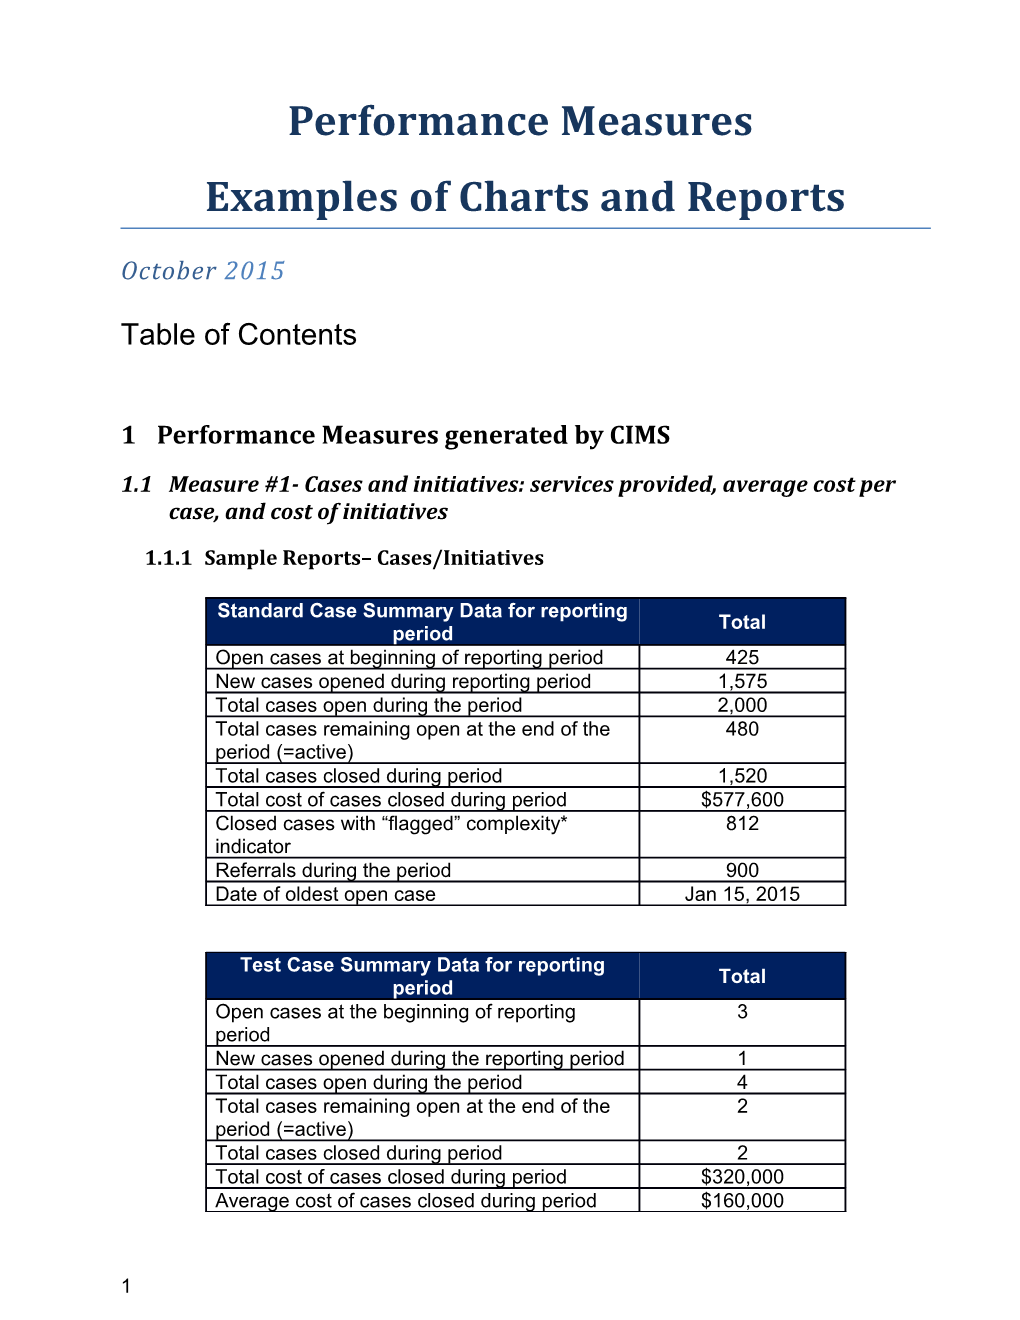 Appendix G: Legal Aid Ontario Clinic Performance Measures. Examples of Charts and Reports